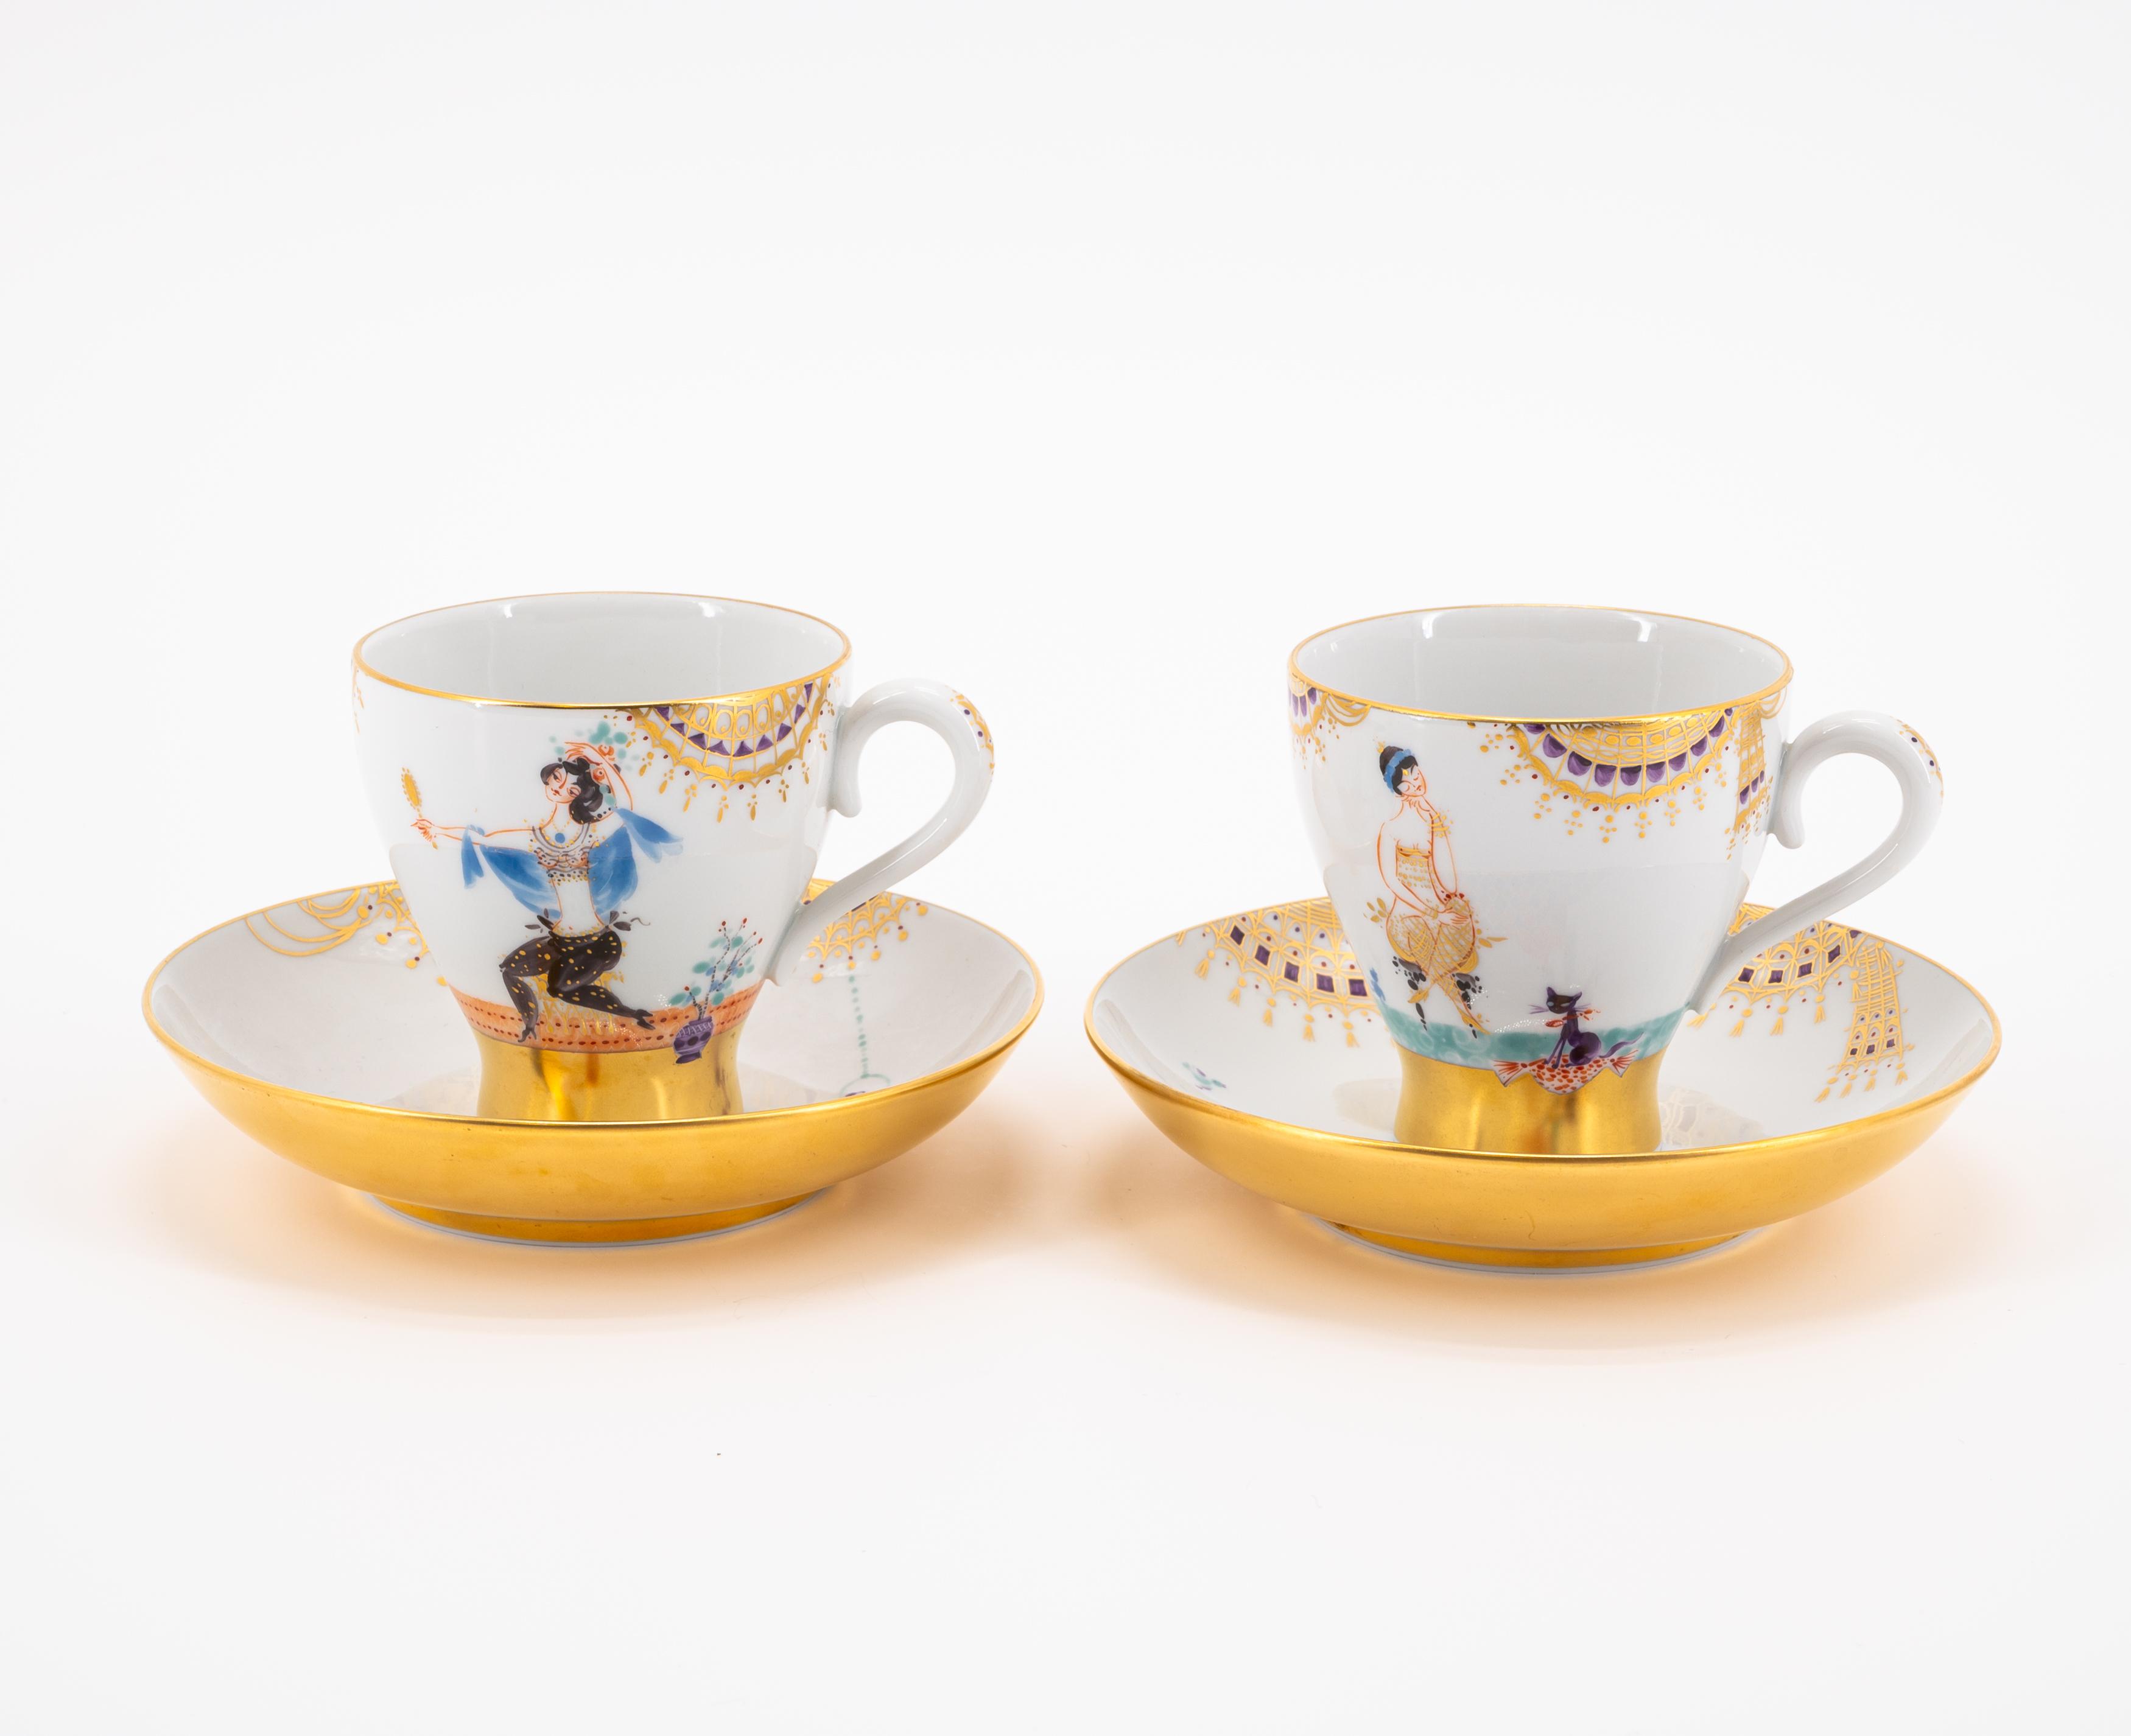 PORCELAIN COFFEE SERVICE '1001 NIGHTS' FOR SIX PEOPLE - Image 4 of 15